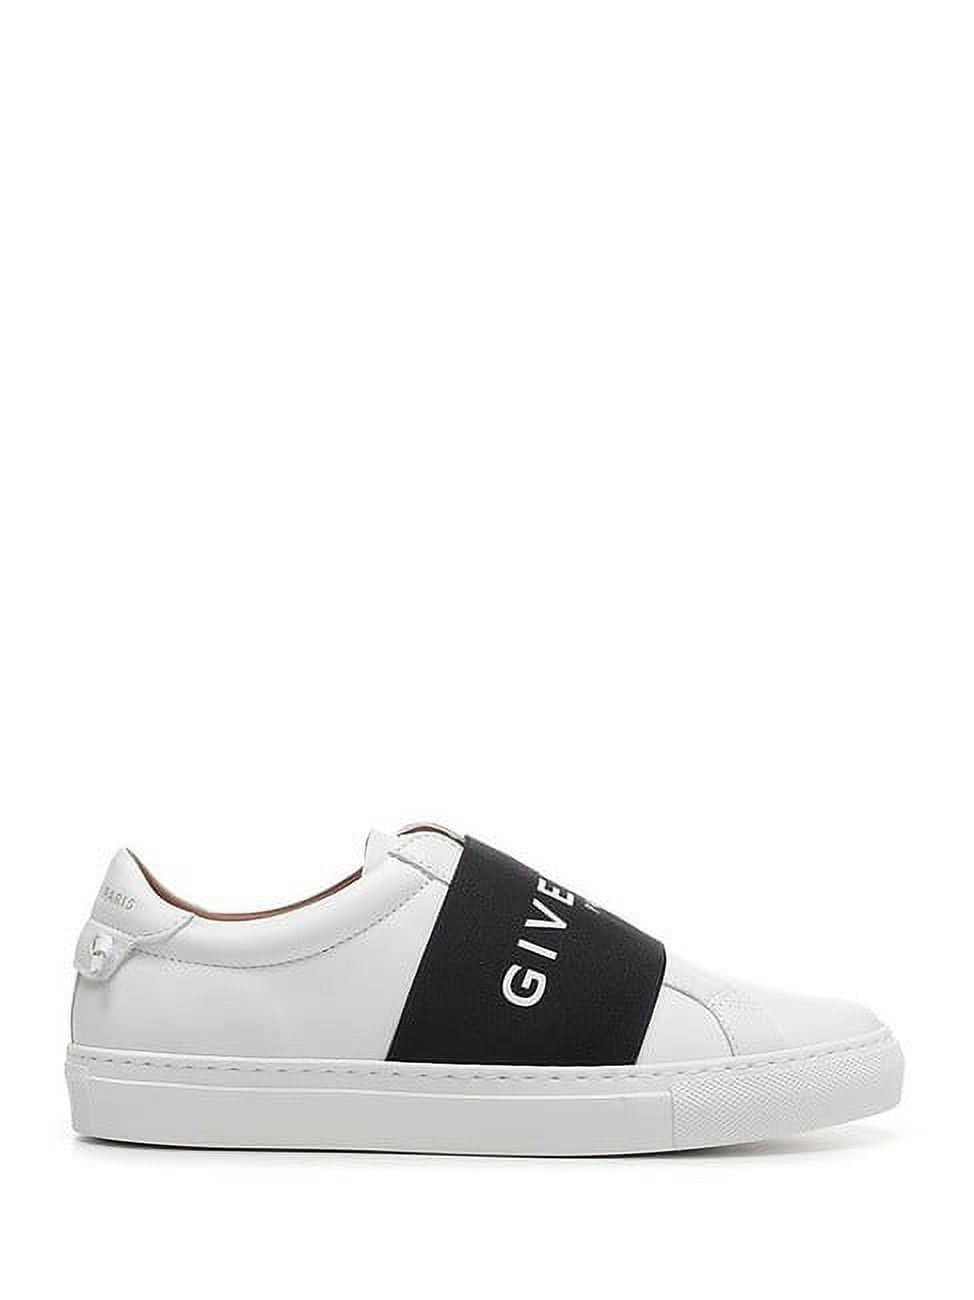 Givenchy Active Runner Sneakers In Nero | ModeSens | Black leather shoes  men, Sneakers, Trainer sneakers